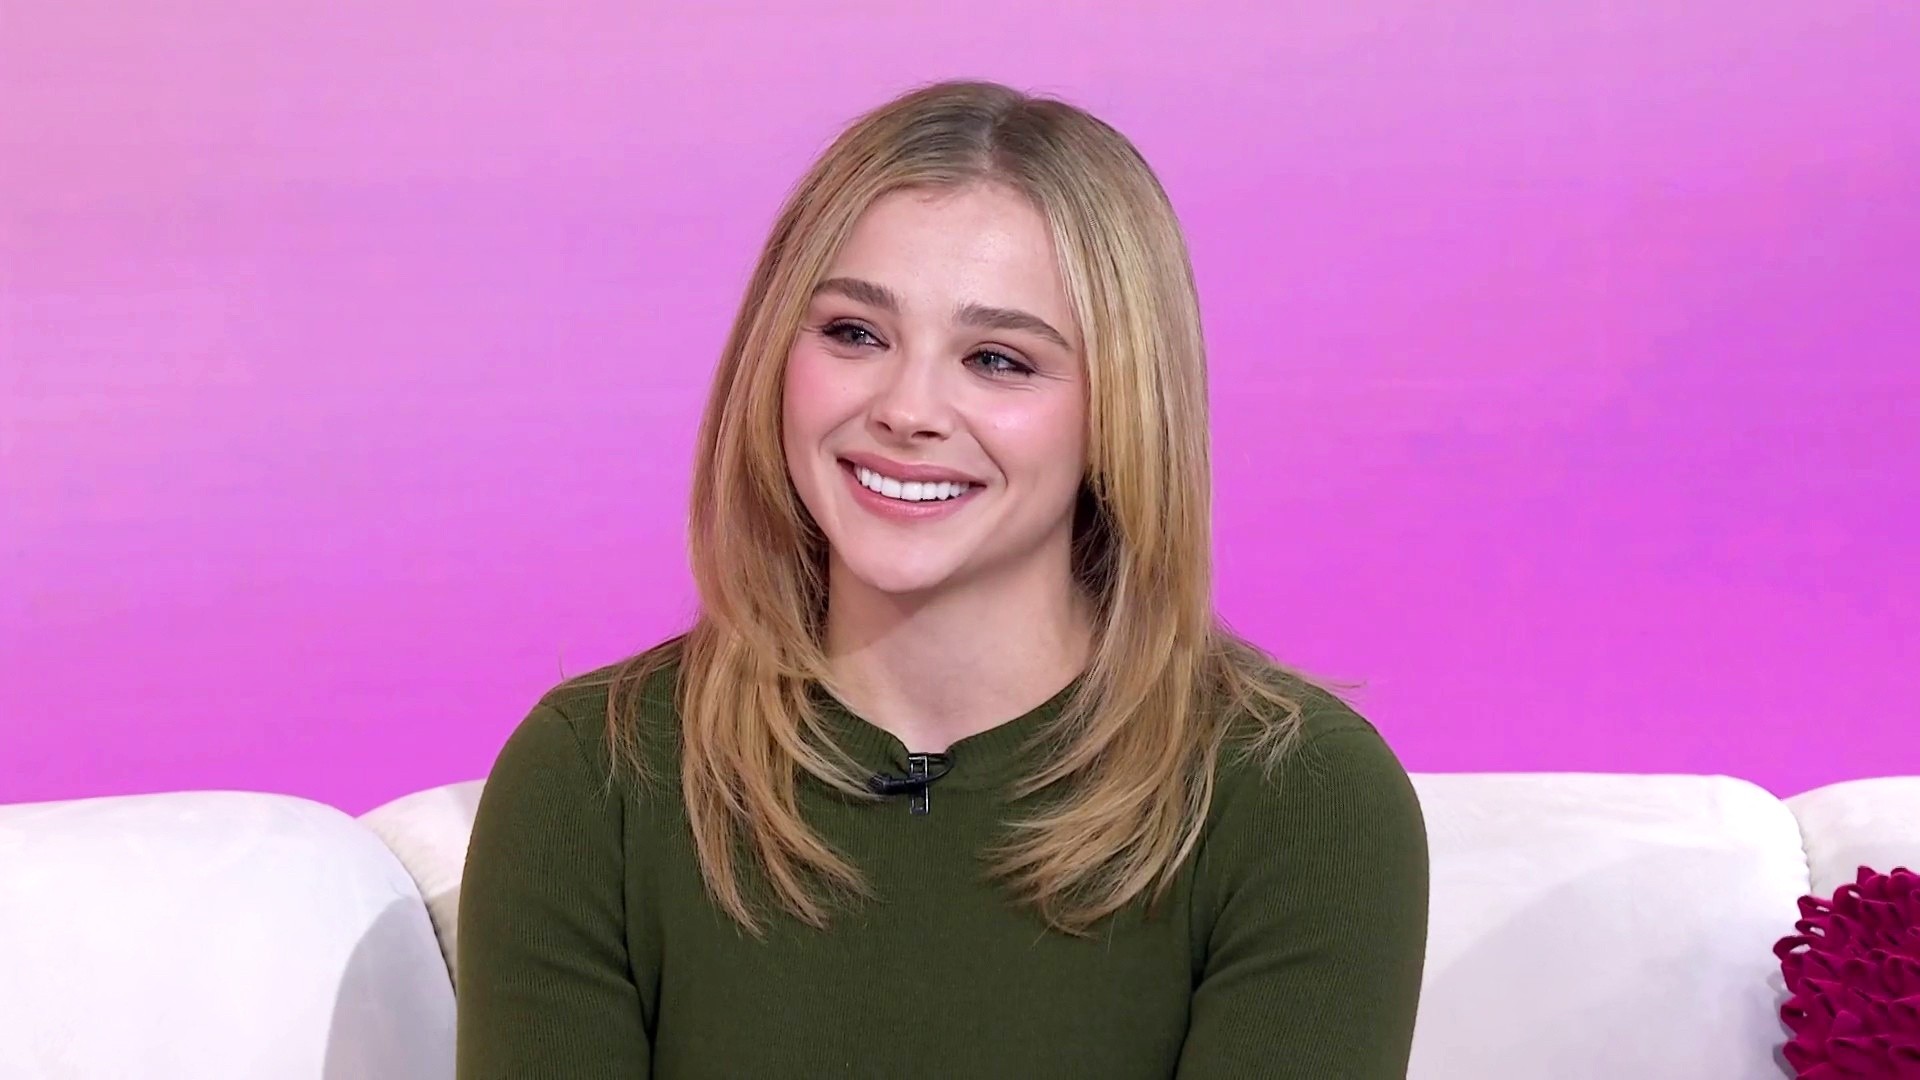 Chloë Grace Moretz Is Dropping Out of Future Movies